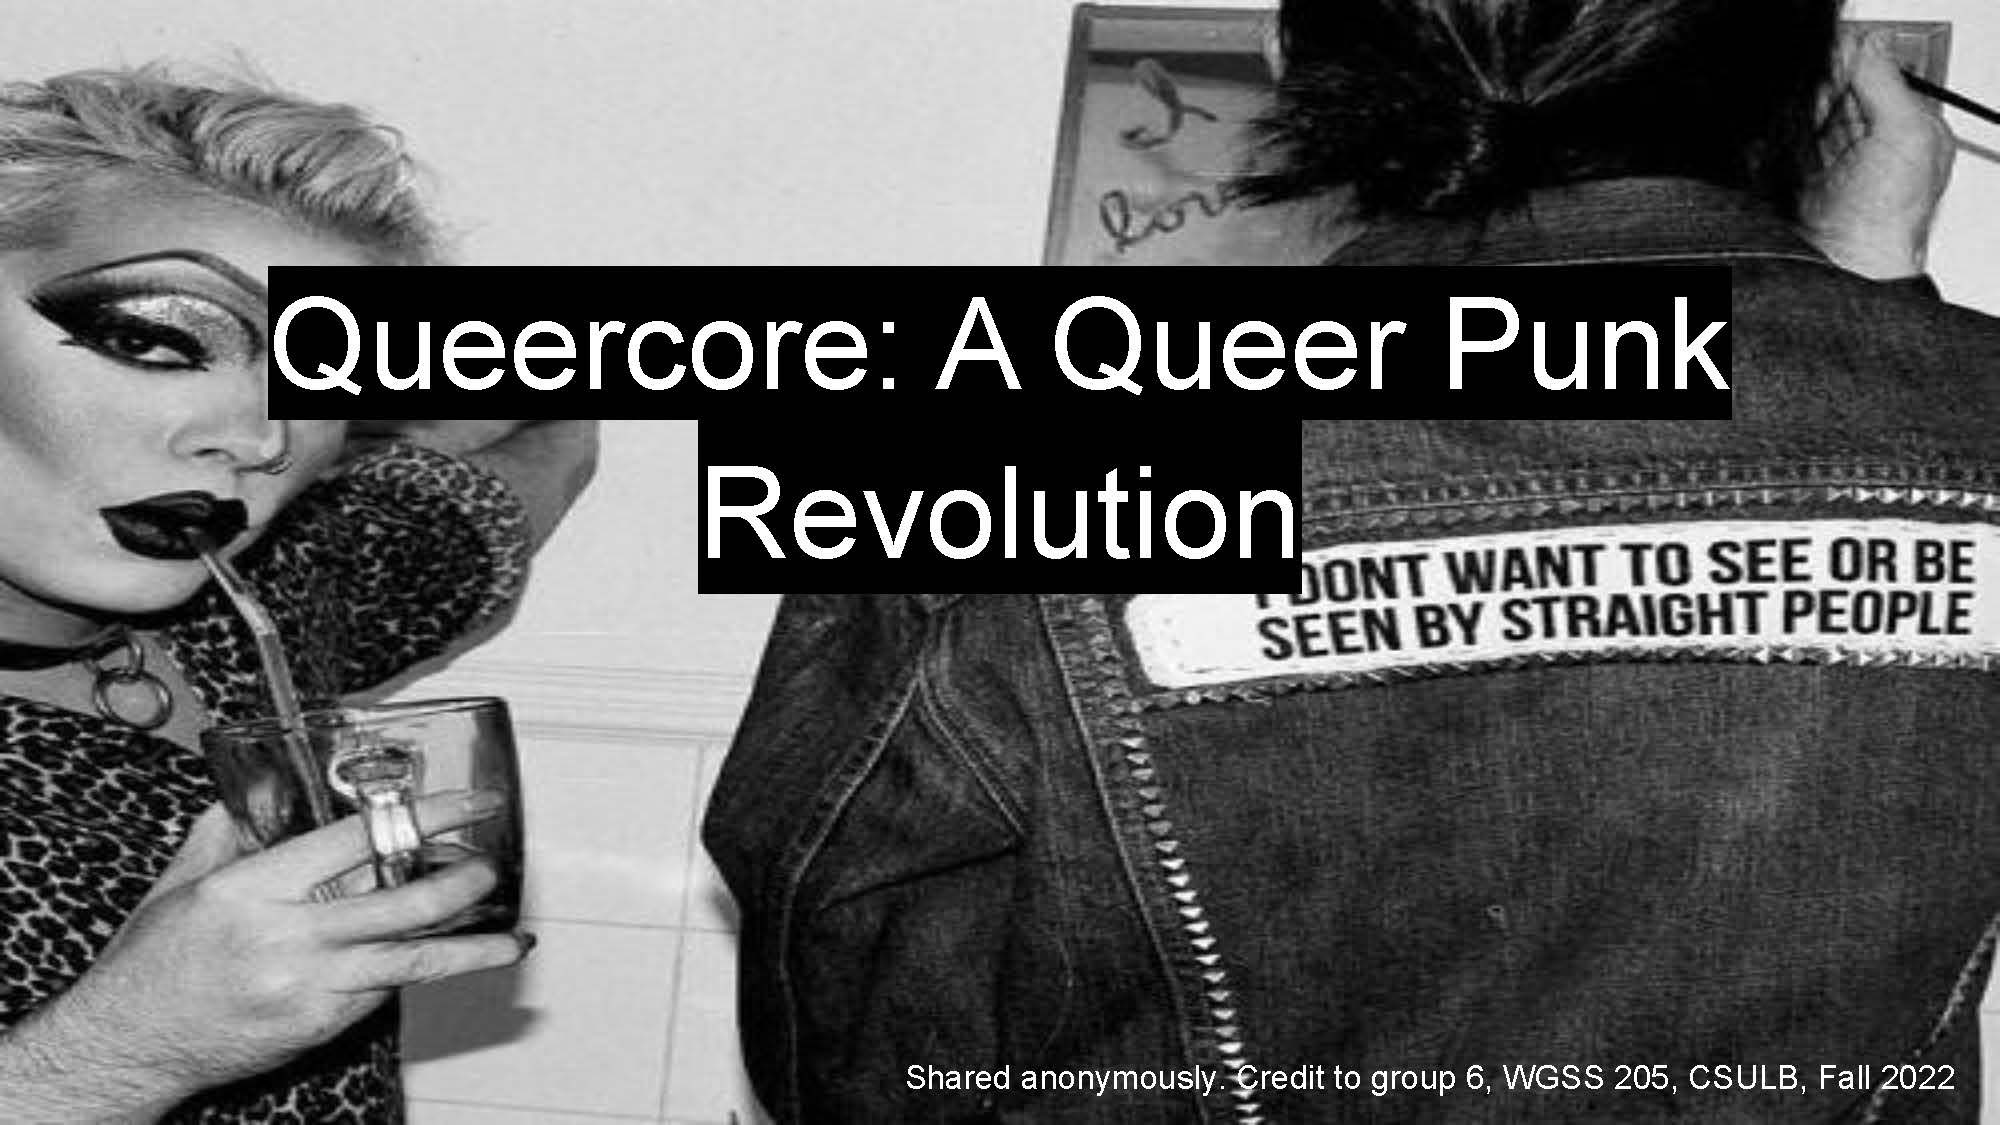 Presentation Cover Page. Queer Cor: A Queer Punk Revolution